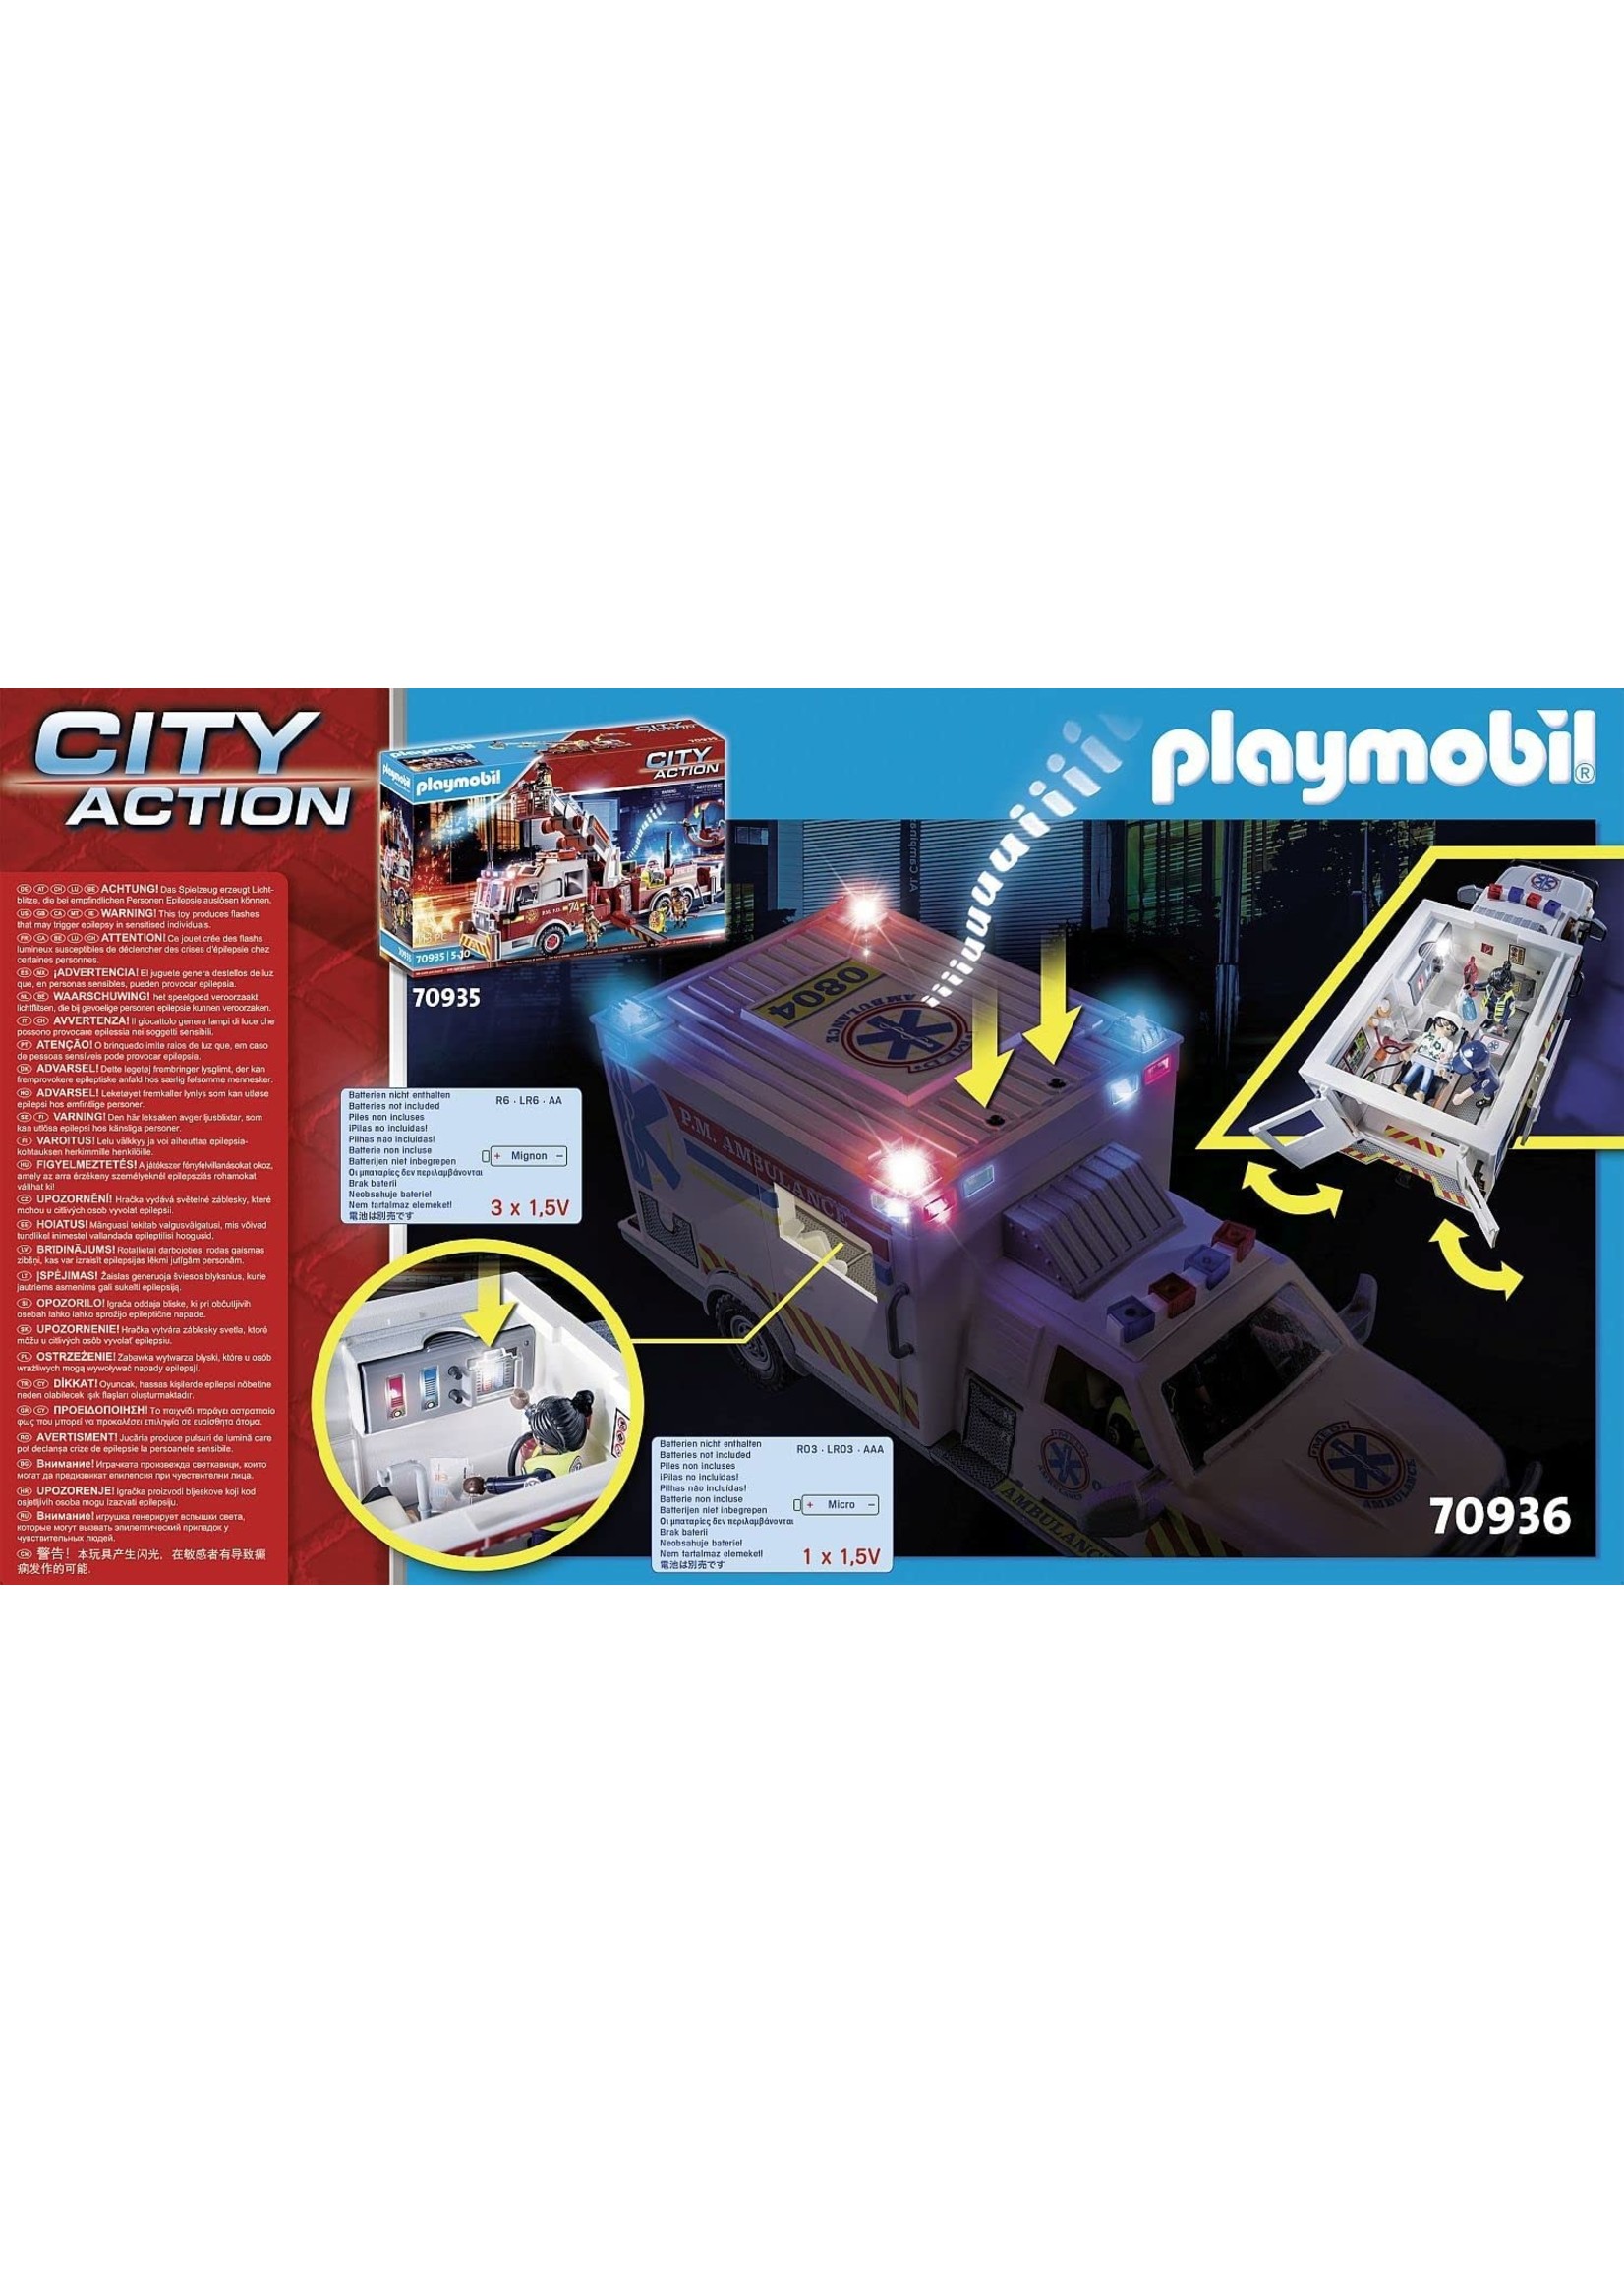 Playmobil Rescue Vehicles: Ambulance with Lights and Sound